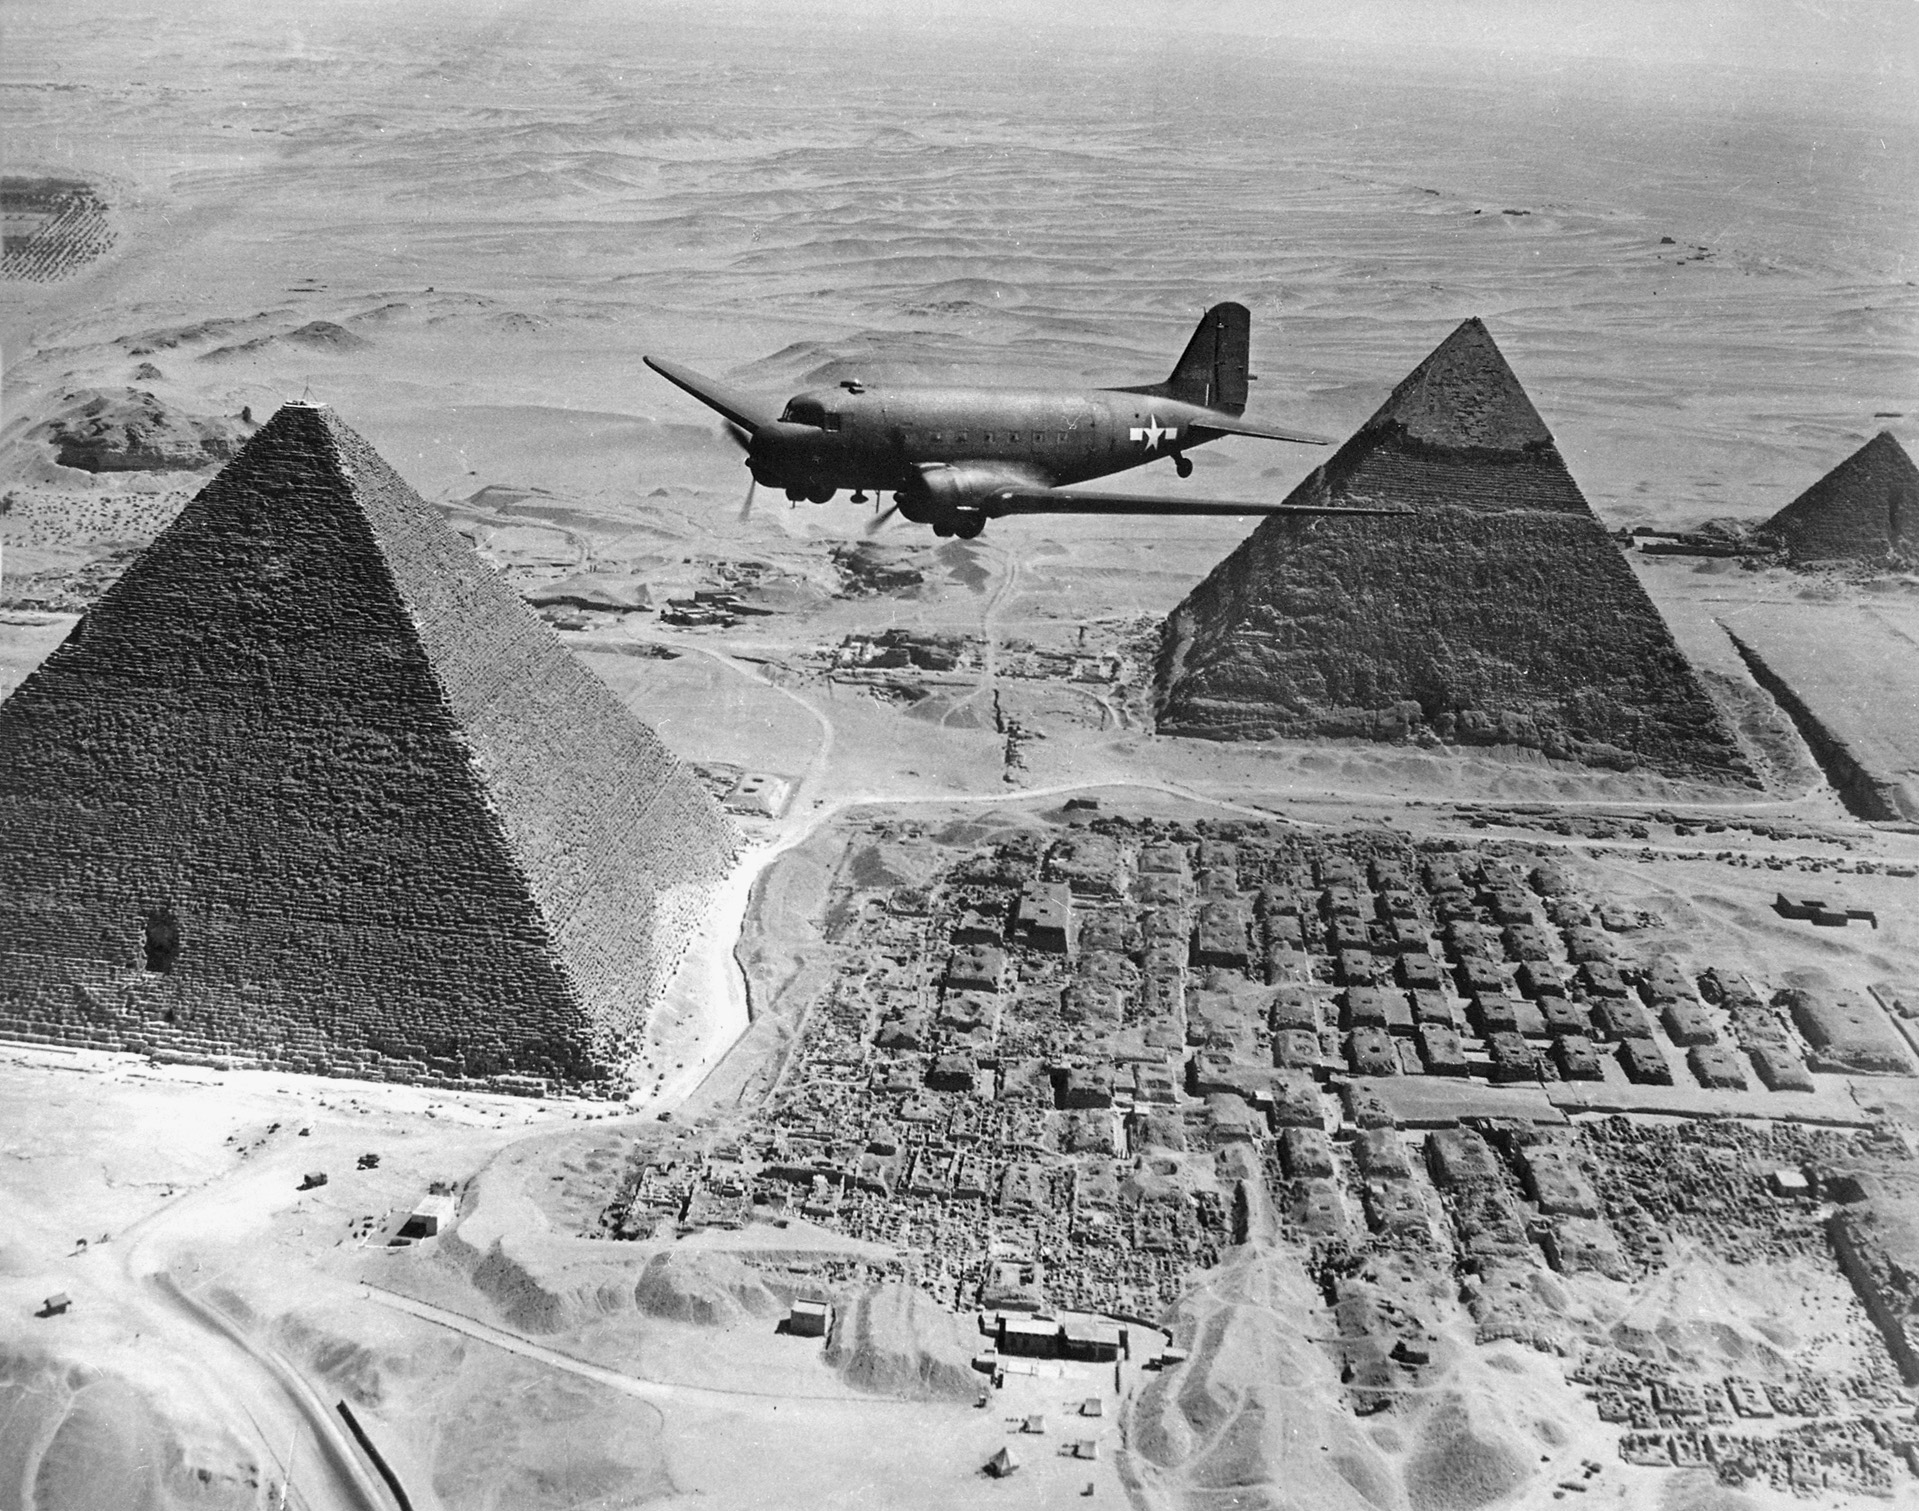 A Douglas C-47 Skytrain transport plane emblazoned with U.S. markings flies over the Pyramids at Giza, Egypt, in 1943.